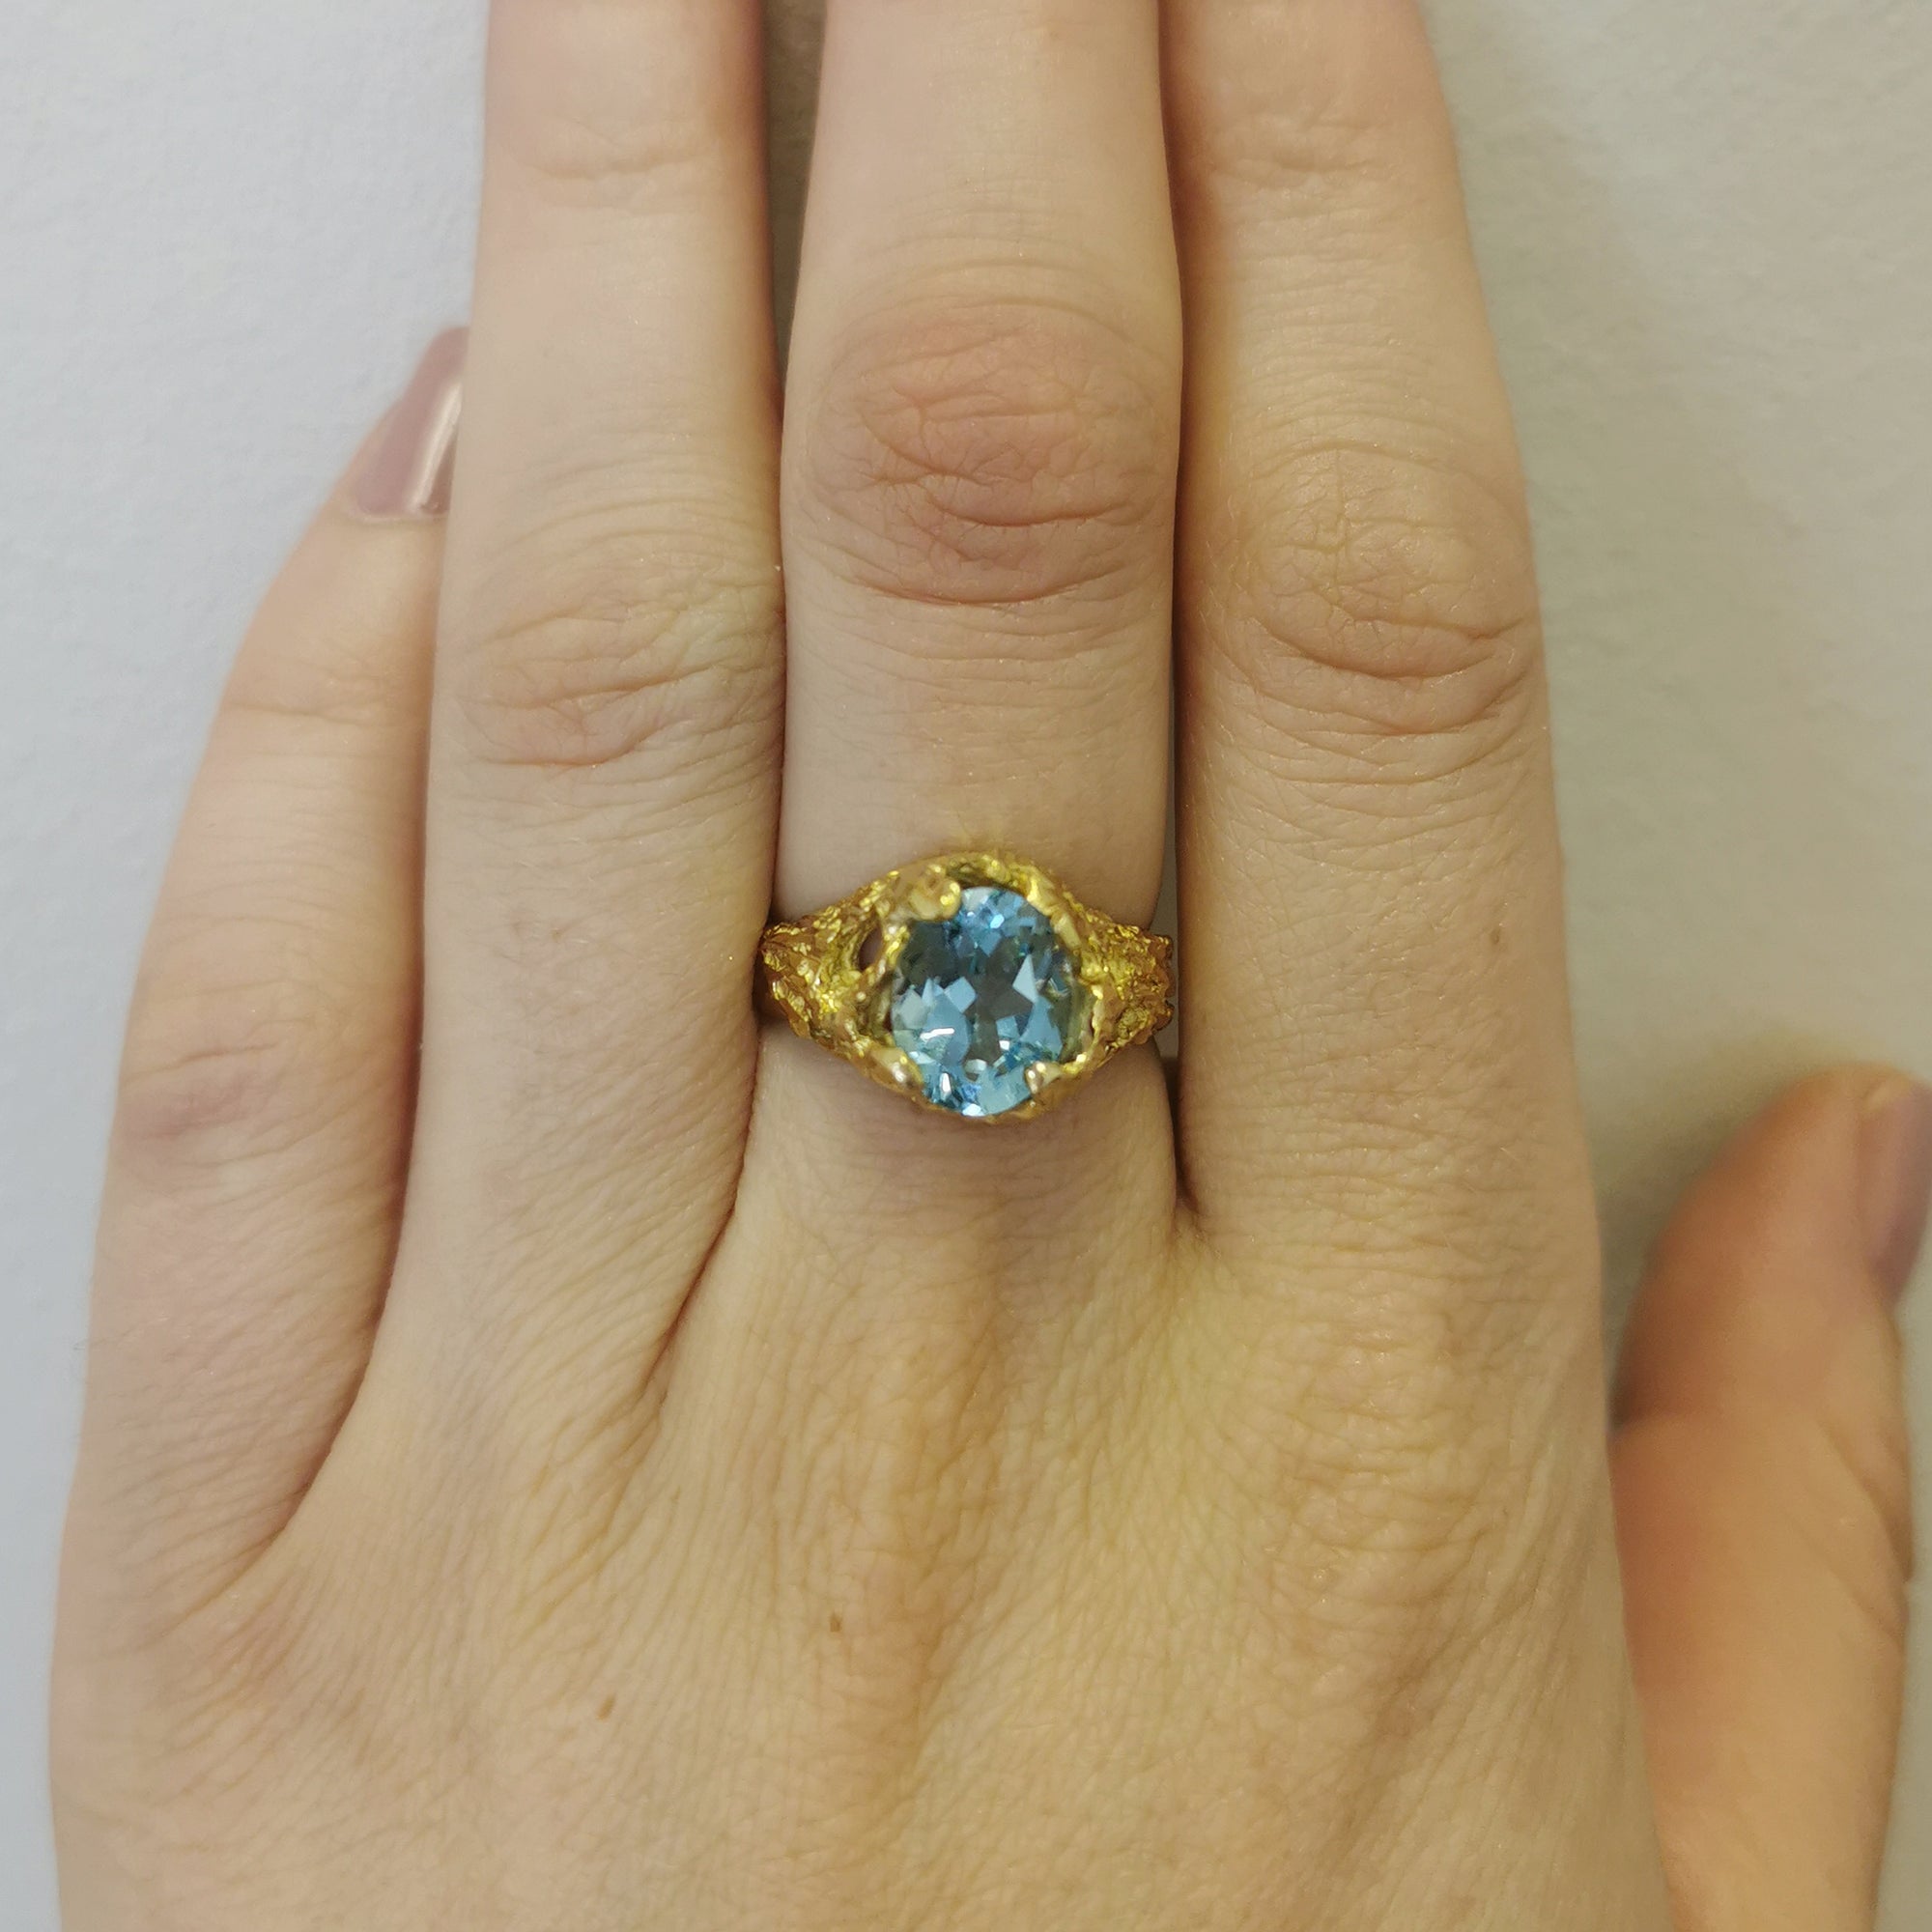 Textured Oval Blue Topaz Cocktail Ring | 3.30ct | SZ 8 |